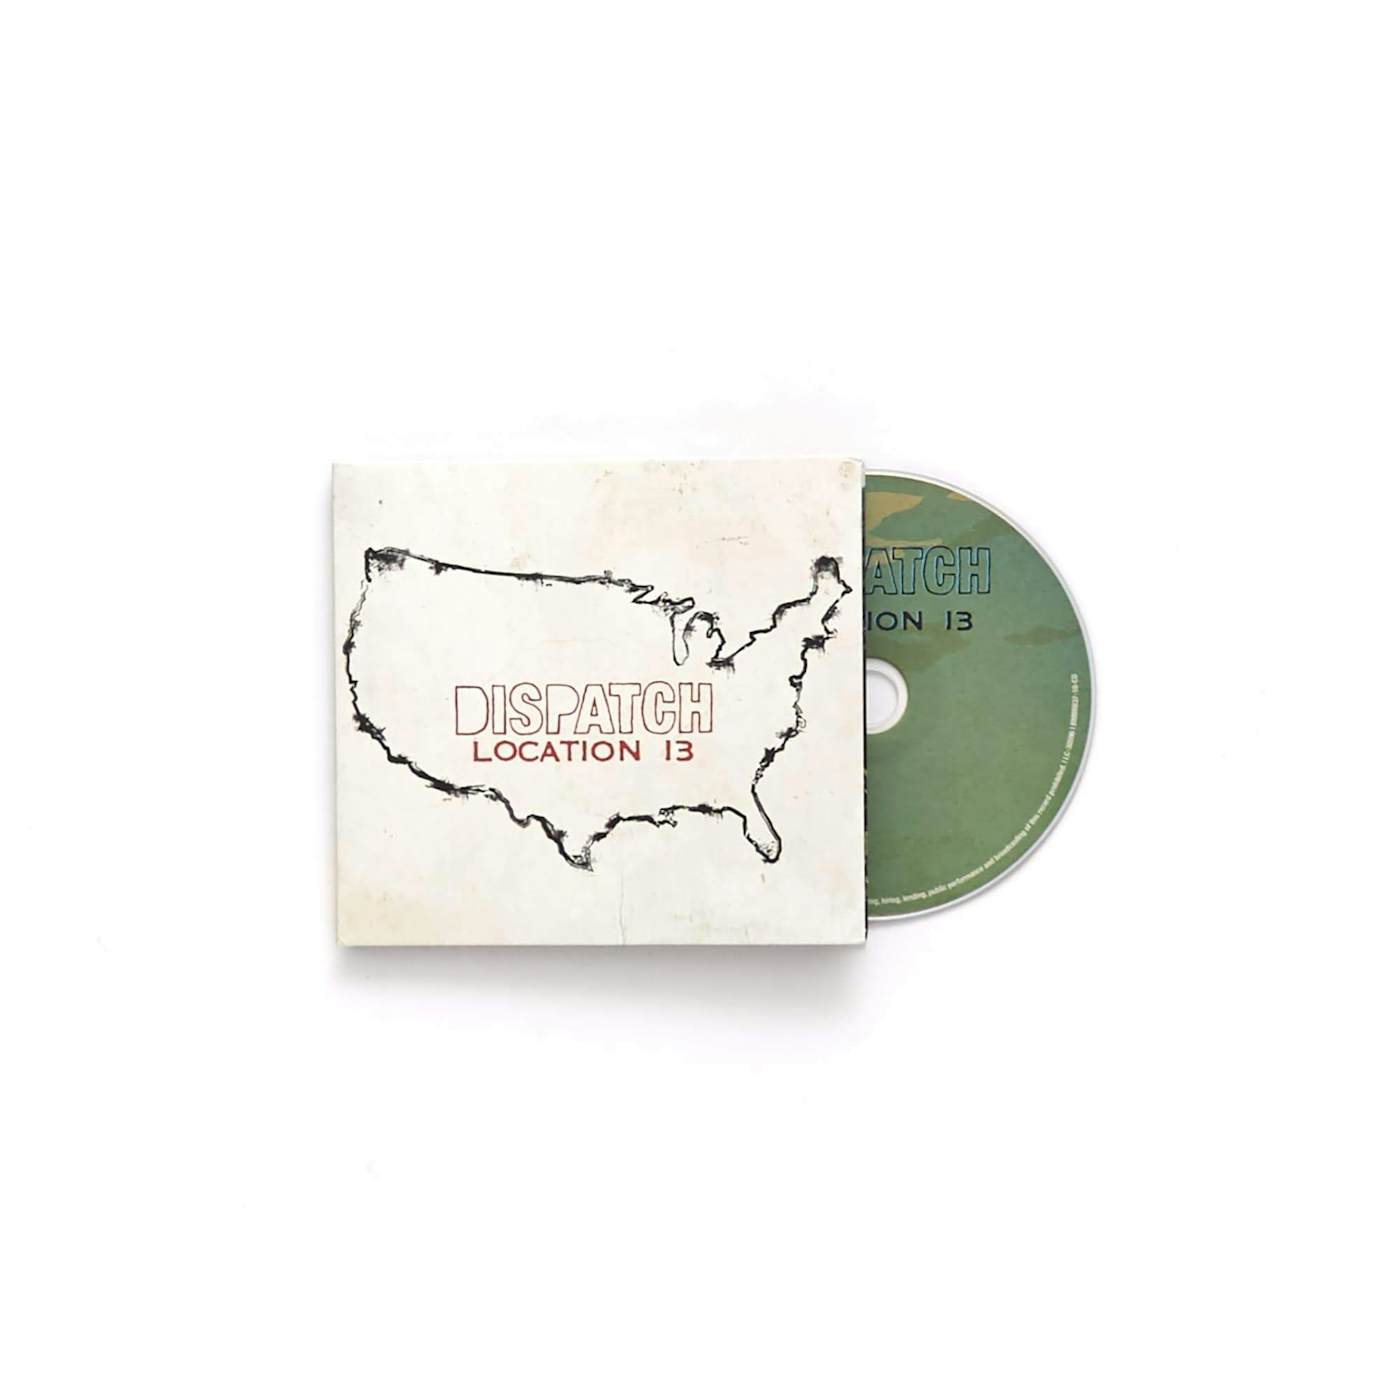 DISPATCH 'Location 13' CD + MP3 Download